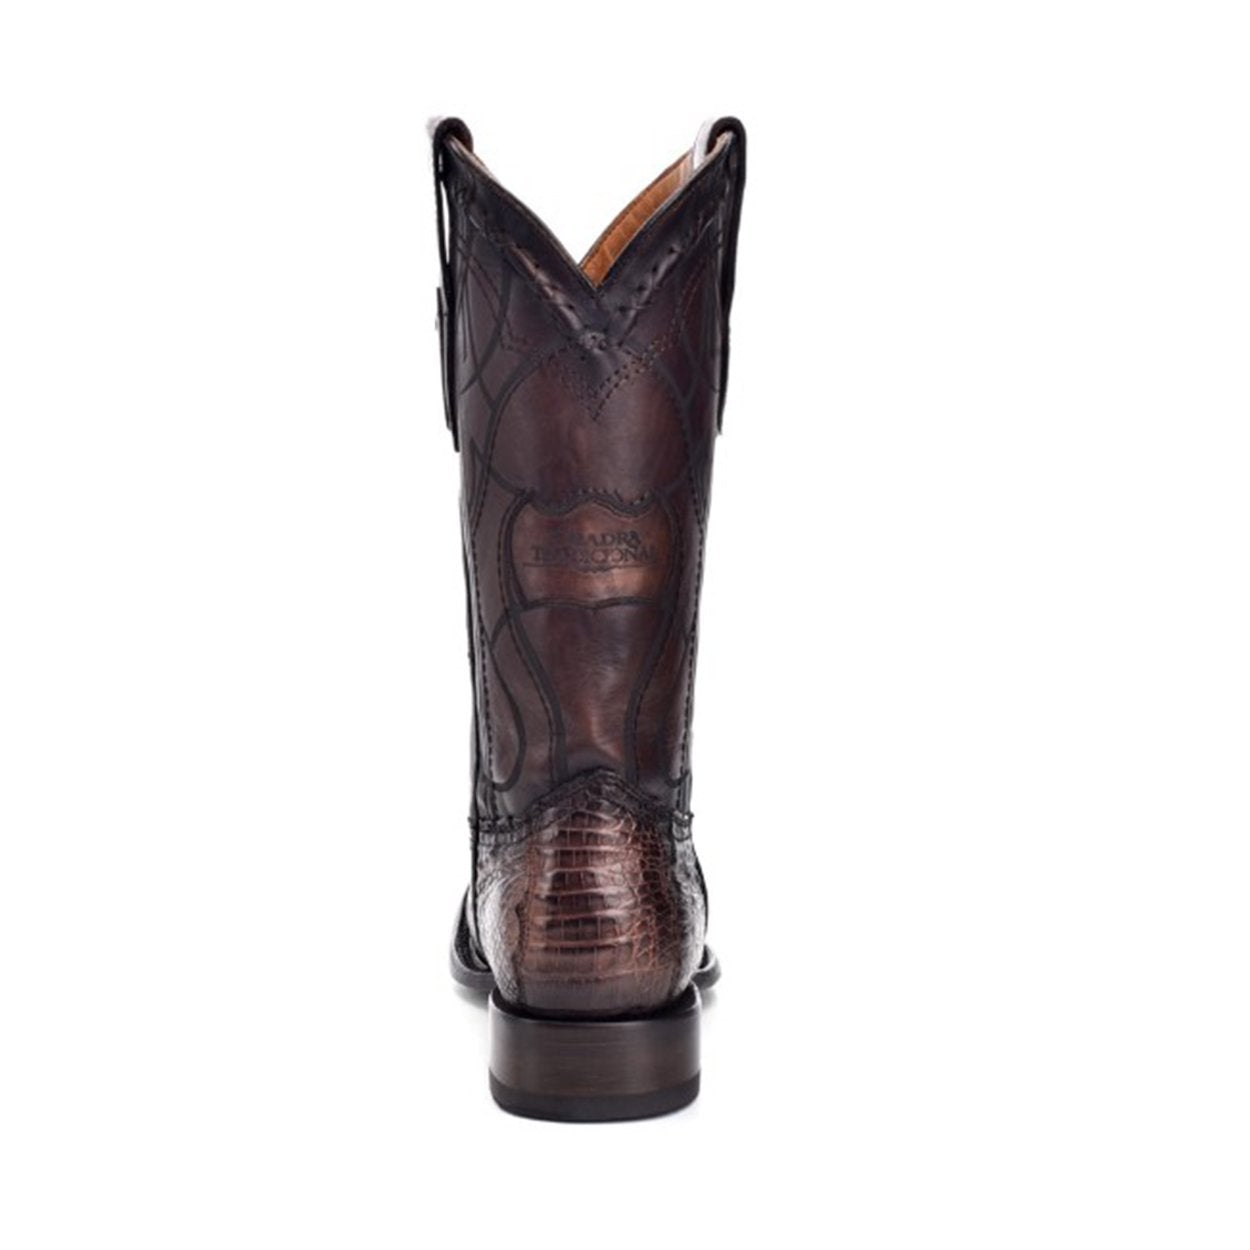 1E10FY - Cuadra brown casual cowboy fuscus caiman leather boots for men-Kuet.us